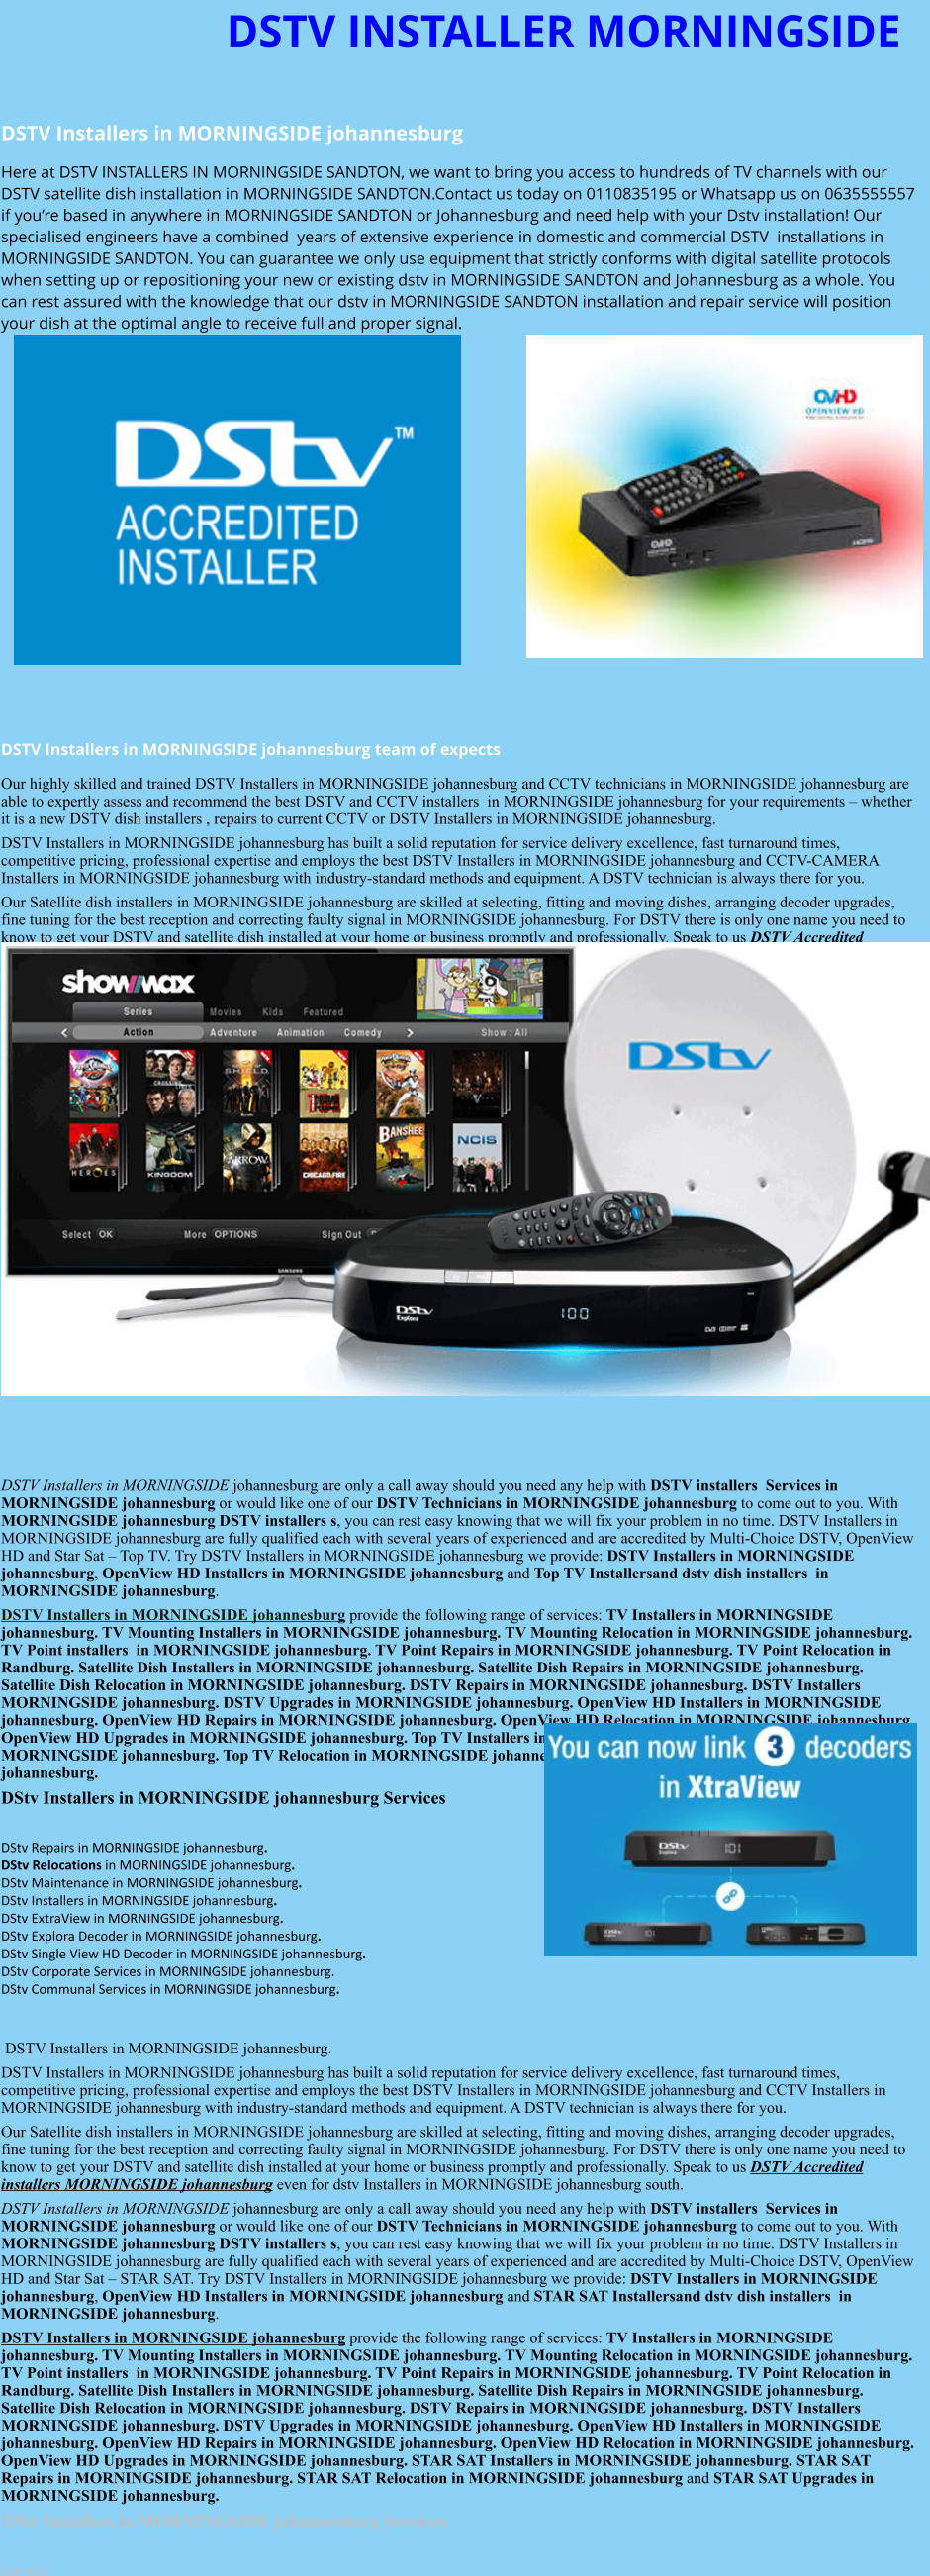 DSTV INSTALLER MORNINGSIDE  DSTV Installers in MORNINGSIDE johannesburg  Here at DSTV INSTALLERS IN MORNINGSIDE SANDTON, we want to bring you access to hundreds of TV channels with our DSTV satellite dish installation in MORNINGSIDE SANDTON.Contact us today on 0110835195 or Whatsapp us on 0635555557 if you’re based in anywhere in MORNINGSIDE SANDTON or Johannesburg and need help with your Dstv installation! Our specialised engineers have a combined  years of extensive experience in domestic and commercial DSTV  installations in MORNINGSIDE SANDTON. You can guarantee we only use equipment that strictly conforms with digital satellite protocols when setting up or repositioning your new or existing dstv in MORNINGSIDE SANDTON and Johannesburg as a whole. You can rest assured with the knowledge that our dstv in MORNINGSIDE SANDTON installation and repair service will position your dish at the optimal angle to receive full and proper signal.                 DSTV Installers in MORNINGSIDE johannesburg team of expects Our highly skilled and trained DSTV Installers in MORNINGSIDE johannesburg and CCTV technicians in MORNINGSIDE johannesburg are able to expertly assess and recommend the best DSTV and CCTV installers  in MORNINGSIDE johannesburg for your requirements – whether it is a new DSTV dish installers , repairs to current CCTV or DSTV Installers in MORNINGSIDE johannesburg. DSTV Installers in MORNINGSIDE johannesburg has built a solid reputation for service delivery excellence, fast turnaround times, competitive pricing, professional expertise and employs the best DSTV Installers in MORNINGSIDE johannesburg and CCTV-CAMERA Installers in MORNINGSIDE johannesburg with industry-standard methods and equipment. A DSTV technician is always there for you. Our Satellite dish installers in MORNINGSIDE johannesburg are skilled at selecting, fitting and moving dishes, arranging decoder upgrades, fine tuning for the best reception and correcting faulty signal in MORNINGSIDE johannesburg. For DSTV there is only one name you need to know to get your DSTV and satellite dish installed at your home or business promptly and professionally. Speak to us DSTV Accredited installers even for dstv Installers in MORNINGSIDE johannesburg south.                      DSTV Installers in MORNINGSIDE johannesburg are only a call away should you need any help with DSTV installers  Services in MORNINGSIDE johannesburg or would like one of our DSTV Technicians in MORNINGSIDE johannesburg to come out to you. With MORNINGSIDE johannesburg DSTV installers s, you can rest easy knowing that we will fix your problem in no time. DSTV Installers in MORNINGSIDE johannesburg are fully qualified each with several years of experienced and are accredited by Multi-Choice DSTV, OpenView HD and Star Sat – Top TV. Try DSTV Installers in MORNINGSIDE johannesburg we provide: DSTV Installers in MORNINGSIDE johannesburg, OpenView HD Installers in MORNINGSIDE johannesburg and Top TV Installersand dstv dish installers  in MORNINGSIDE johannesburg. DSTV Installers in MORNINGSIDE johannesburg provide the following range of services: TV Installers in MORNINGSIDE johannesburg. TV Mounting Installers in MORNINGSIDE johannesburg. TV Mounting Relocation in MORNINGSIDE johannesburg. TV Point installers  in MORNINGSIDE johannesburg. TV Point Repairs in MORNINGSIDE johannesburg. TV Point Relocation in Randburg. Satellite Dish Installers in MORNINGSIDE johannesburg. Satellite Dish Repairs in MORNINGSIDE johannesburg. Satellite Dish Relocation in MORNINGSIDE johannesburg. DSTV Repairs in MORNINGSIDE johannesburg. DSTV Installers MORNINGSIDE johannesburg. DSTV Upgrades in MORNINGSIDE johannesburg. OpenView HD Installers in MORNINGSIDE johannesburg. OpenView HD Repairs in MORNINGSIDE johannesburg. OpenView HD Relocation in MORNINGSIDE johannesburg. OpenView HD Upgrades in MORNINGSIDE johannesburg. Top TV Installers in MORNINGSIDE johannesburg. Top TV Repairs in MORNINGSIDE johannesburg. Top TV Relocation in MORNINGSIDE johannesburg and Top TV Upgrades in MORNINGSIDE johannesburg. DStv Installers in MORNINGSIDE johannesburg Services  DStv Repairs in MORNINGSIDE johannesburg.  DStv Relocations in MORNINGSIDE johannesburg.  DStv Maintenance in MORNINGSIDE johannesburg. DStv Installers in MORNINGSIDE johannesburg. DStv ExtraView in MORNINGSIDE johannesburg. DStv Explora Decoder in MORNINGSIDE johannesburg. DStv Single View HD Decoder in MORNINGSIDE johannesburg. DStv Corporate Services in MORNINGSIDE johannesburg. DStv Communal Services in MORNINGSIDE johannesburg.    DSTV Installers in MORNINGSIDE johannesburg. DSTV Installers in MORNINGSIDE johannesburg has built a solid reputation for service delivery excellence, fast turnaround times, competitive pricing, professional expertise and employs the best DSTV Installers in MORNINGSIDE johannesburg and CCTV Installers in MORNINGSIDE johannesburg with industry-standard methods and equipment. A DSTV technician is always there for you. Our Satellite dish installers in MORNINGSIDE johannesburg are skilled at selecting, fitting and moving dishes, arranging decoder upgrades, fine tuning for the best reception and correcting faulty signal in MORNINGSIDE johannesburg. For DSTV there is only one name you need to know to get your DSTV and satellite dish installed at your home or business promptly and professionally. Speak to us DSTV Accredited installers MORNINGSIDE johannesburg even for dstv Installers in MORNINGSIDE johannesburg south. DSTV Installers in MORNINGSIDE johannesburg are only a call away should you need any help with DSTV installers  Services in MORNINGSIDE johannesburg or would like one of our DSTV Technicians in MORNINGSIDE johannesburg to come out to you. With MORNINGSIDE johannesburg DSTV installers s, you can rest easy knowing that we will fix your problem in no time. DSTV Installers in MORNINGSIDE johannesburg are fully qualified each with several years of experienced and are accredited by Multi-Choice DSTV, OpenView HD and Star Sat – STAR SAT. Try DSTV Installers in MORNINGSIDE johannesburg we provide: DSTV Installers in MORNINGSIDE johannesburg, OpenView HD Installers in MORNINGSIDE johannesburg and STAR SAT Installersand dstv dish installers  in MORNINGSIDE johannesburg. DSTV Installers in MORNINGSIDE johannesburg provide the following range of services: TV Installers in MORNINGSIDE johannesburg. TV Mounting Installers in MORNINGSIDE johannesburg. TV Mounting Relocation in MORNINGSIDE johannesburg. TV Point installers  in MORNINGSIDE johannesburg. TV Point Repairs in MORNINGSIDE johannesburg. TV Point Relocation in Randburg. Satellite Dish Installers in MORNINGSIDE johannesburg. Satellite Dish Repairs in MORNINGSIDE johannesburg. Satellite Dish Relocation in MORNINGSIDE johannesburg. DSTV Repairs in MORNINGSIDE johannesburg. DSTV Installers MORNINGSIDE johannesburg. DSTV Upgrades in MORNINGSIDE johannesburg. OpenView HD Installers in MORNINGSIDE johannesburg. OpenView HD Repairs in MORNINGSIDE johannesburg. OpenView HD Relocation in MORNINGSIDE johannesburg. OpenView HD Upgrades in MORNINGSIDE johannesburg. STAR SAT Installers in MORNINGSIDE johannesburg. STAR SAT Repairs in MORNINGSIDE johannesburg. STAR SAT Relocation in MORNINGSIDE johannesburg and STAR SAT Upgrades in MORNINGSIDE johannesburg. DStv Installers in MORNINGSIDE johannesburg Services  See also